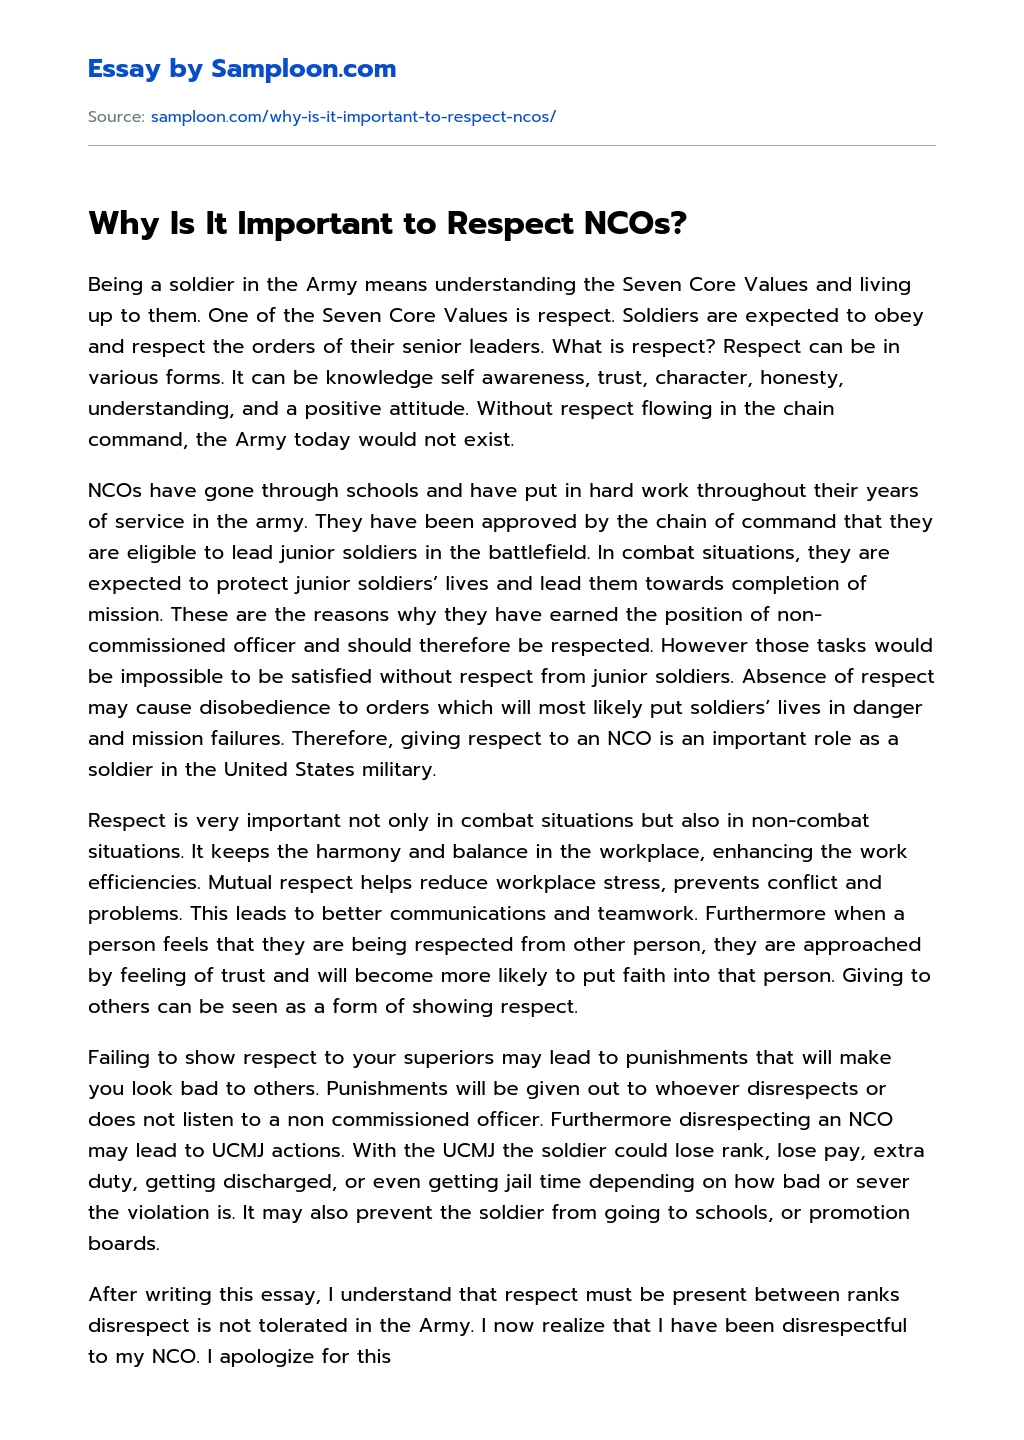 Why Is It Important to Respect NCOs? essay